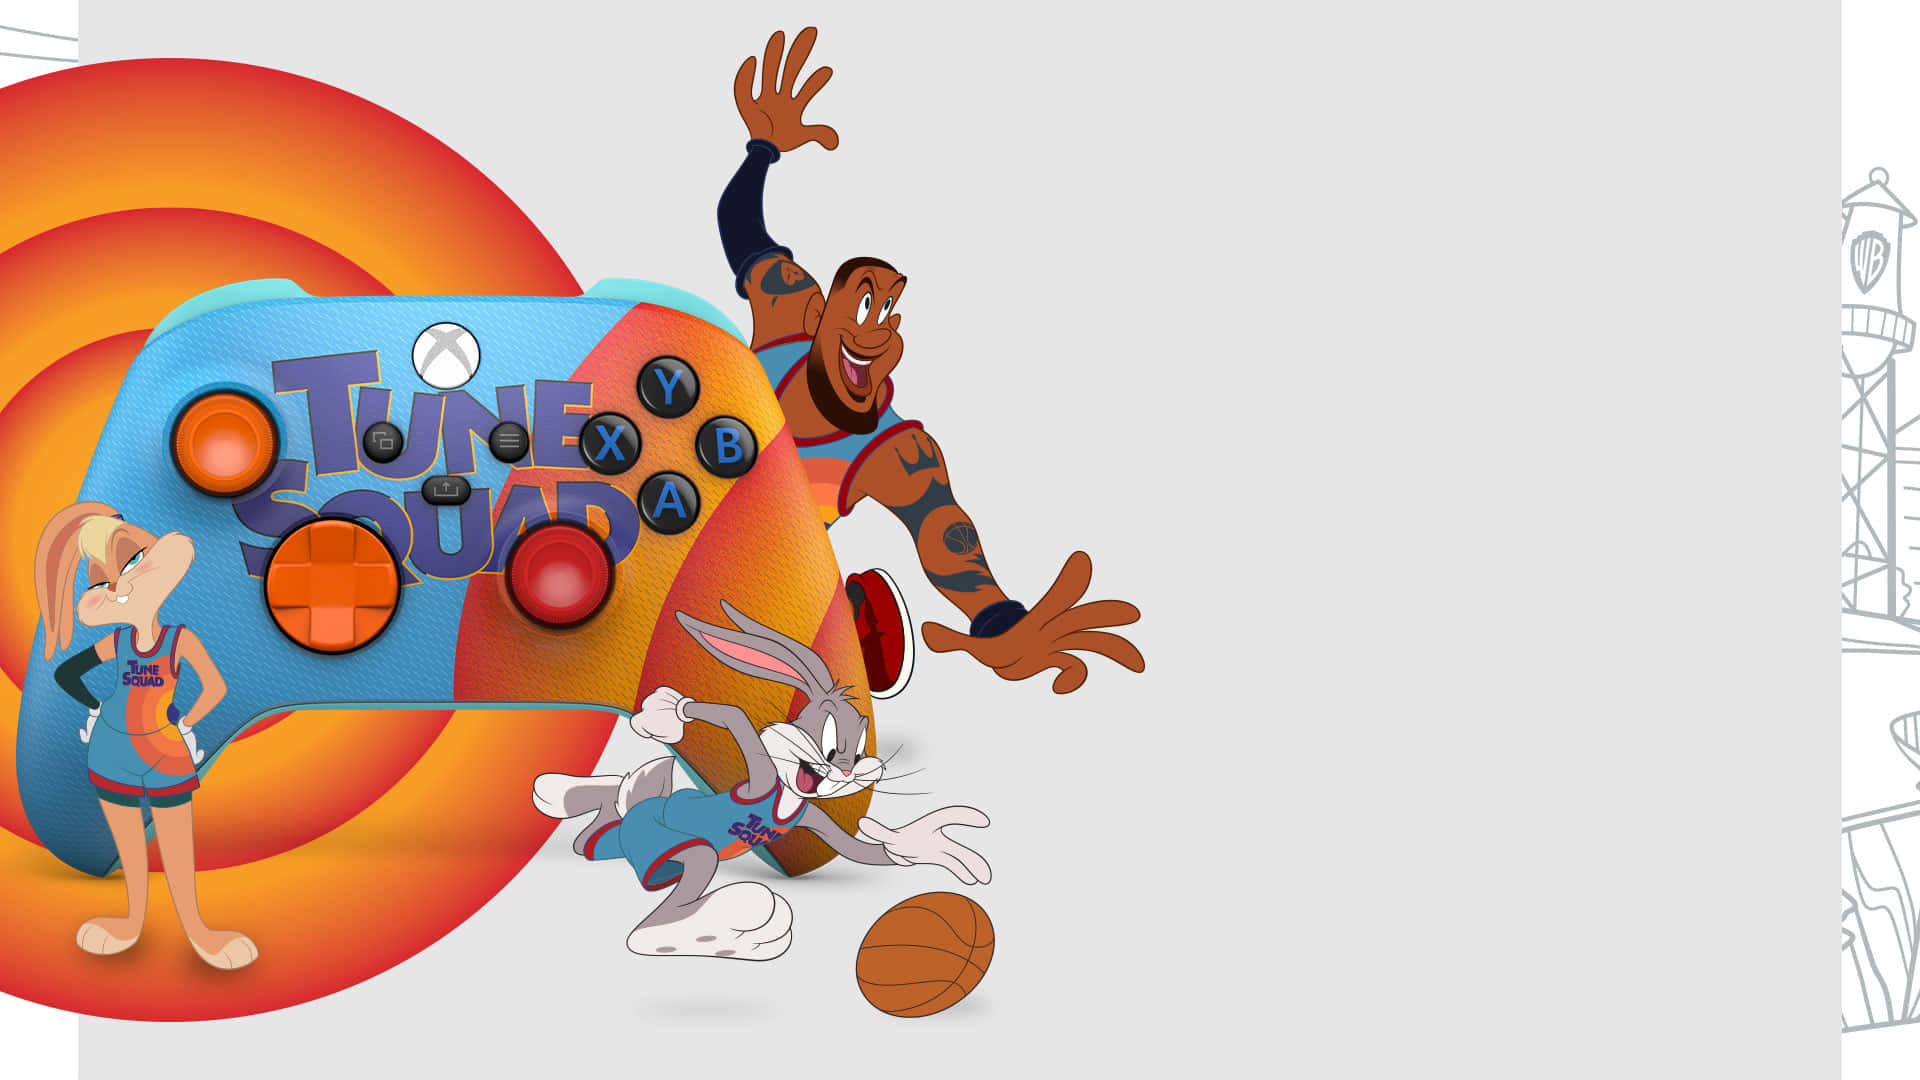 Join Bugs Bunny, Lebron James, and the rest of the Looney Tunes gang on an out of this world adventure in Space Jam: A New Legacy Wallpaper